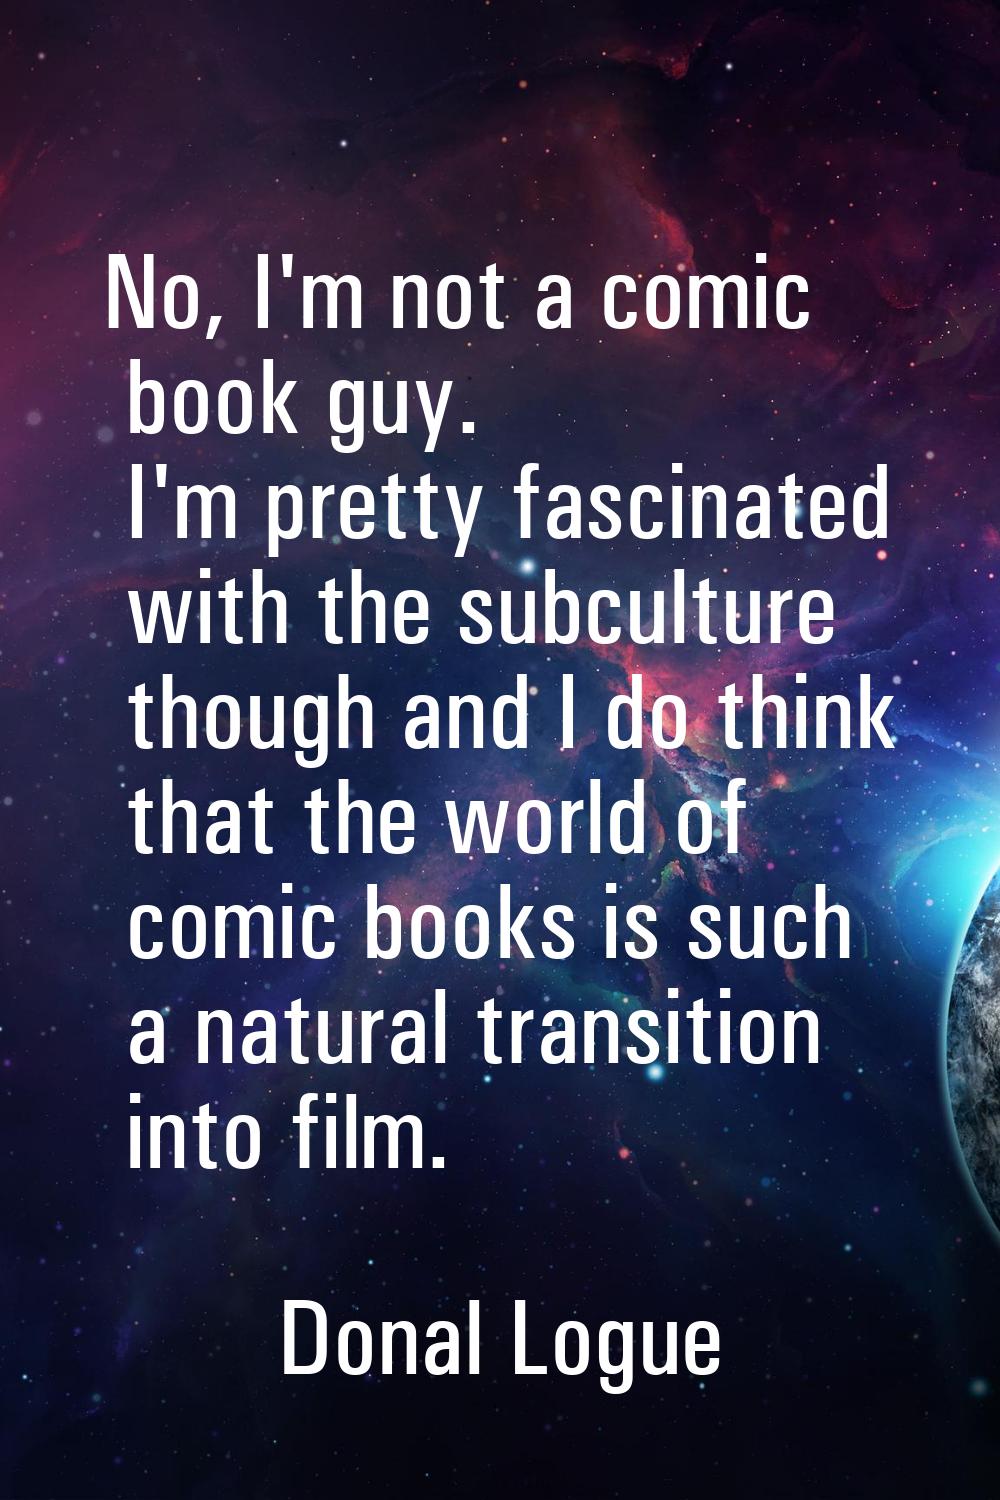 No, I'm not a comic book guy. I'm pretty fascinated with the subculture though and I do think that 